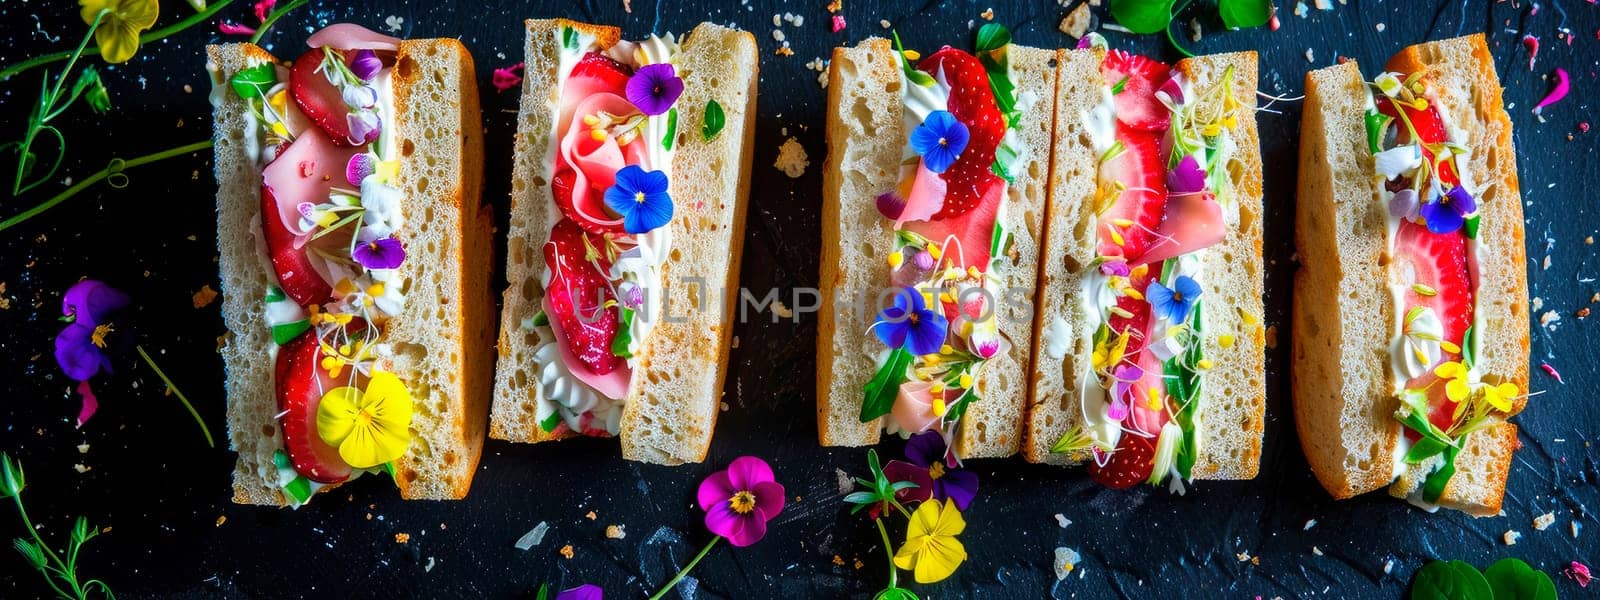 sandwiches with flowers on the table. selective focus. by yanadjana